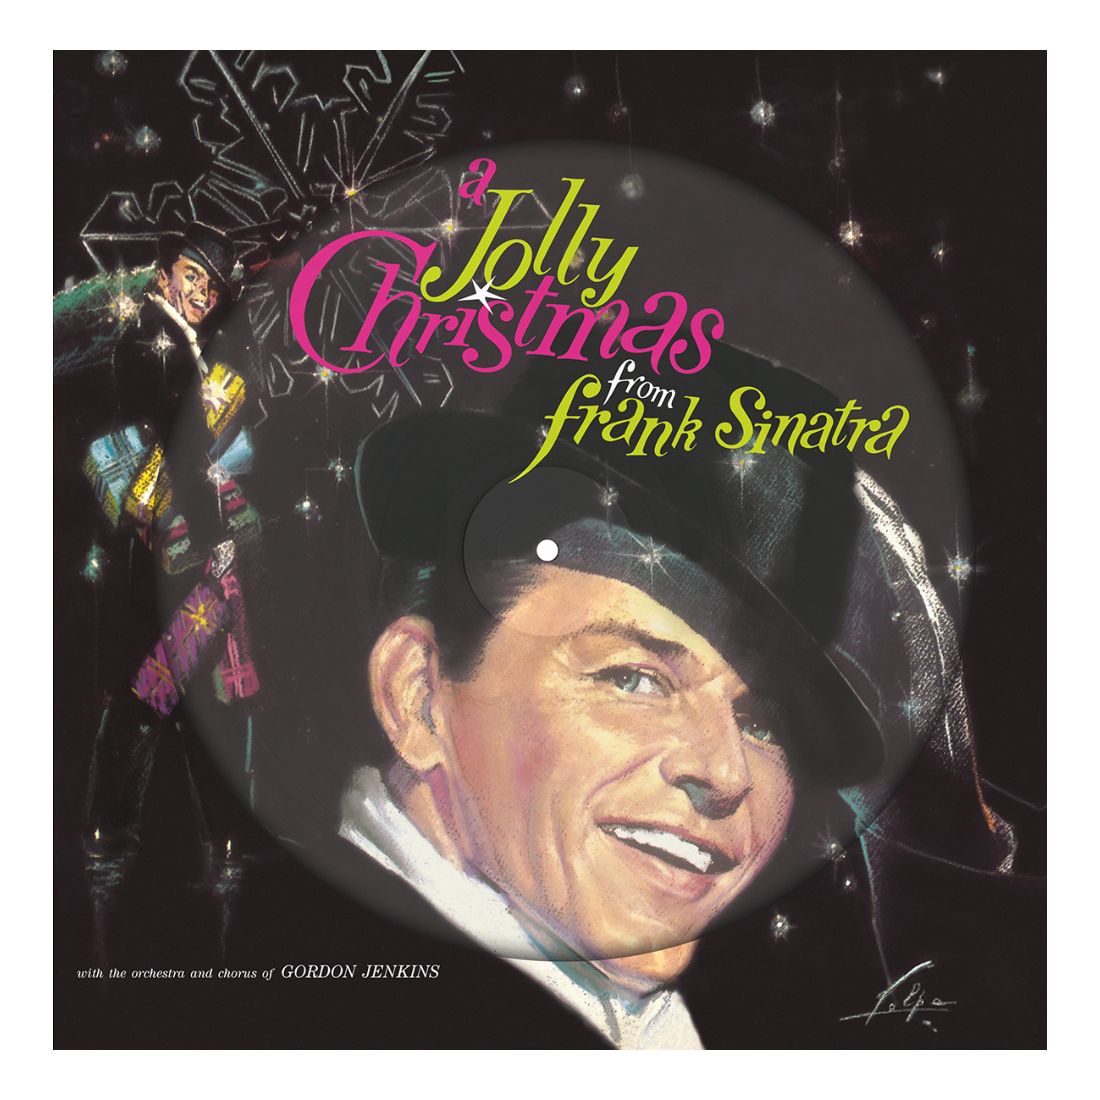 Виниловая пластинка A Jolly Christmas from Frank Sinatra (Picture Disc) | Frank Sinatra рождество frank sinatra a jolly christmas from frank sinatra picture vinyl